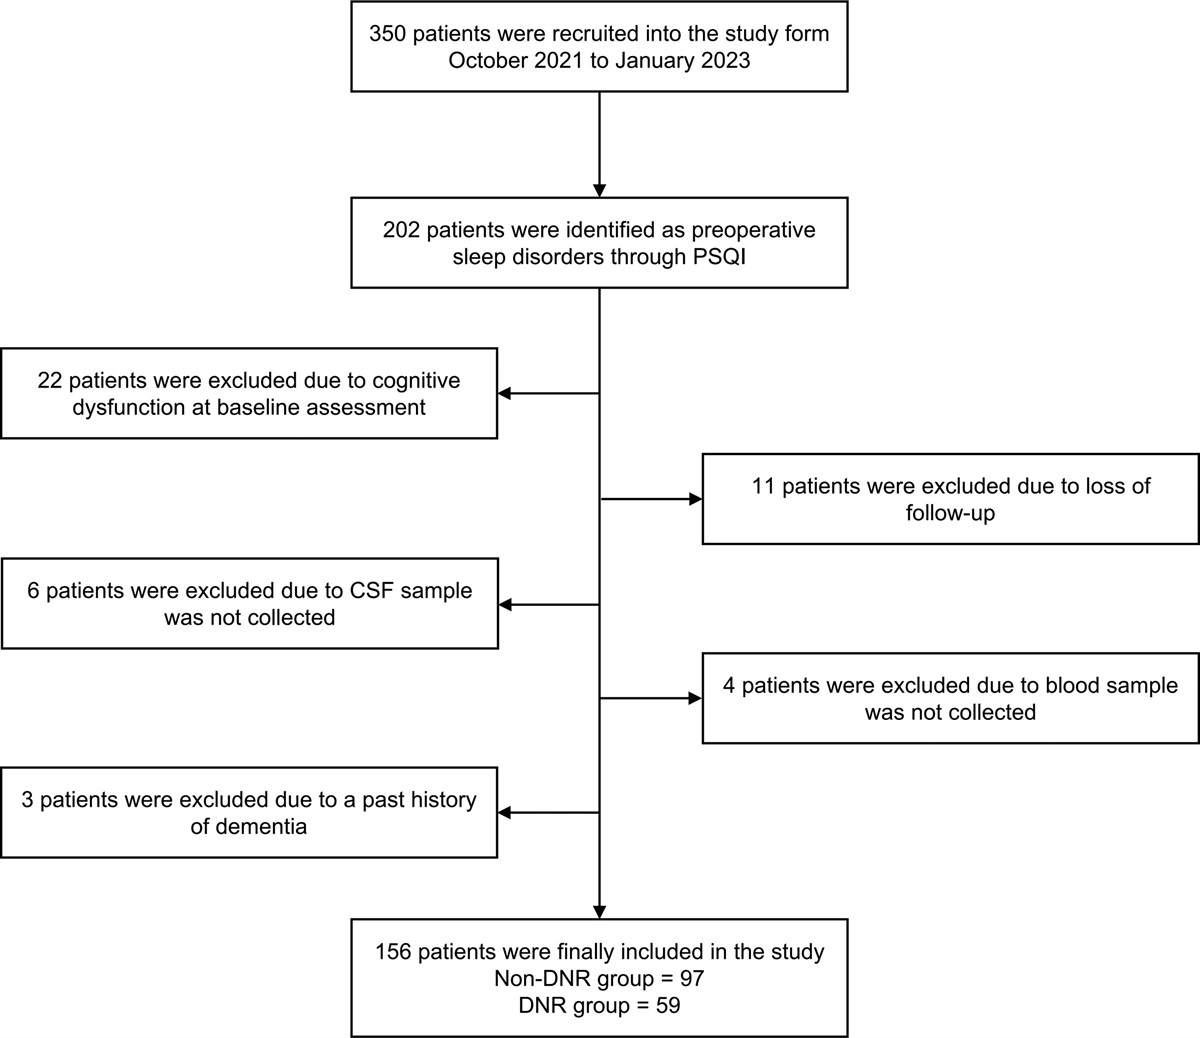 Melanin-Concentrating Hormone Is Associated With Delayed Neurocognitive Recovery in Older Adult Patients With Preoperative Sleep Disorders Undergoing Spinal Anesthesia